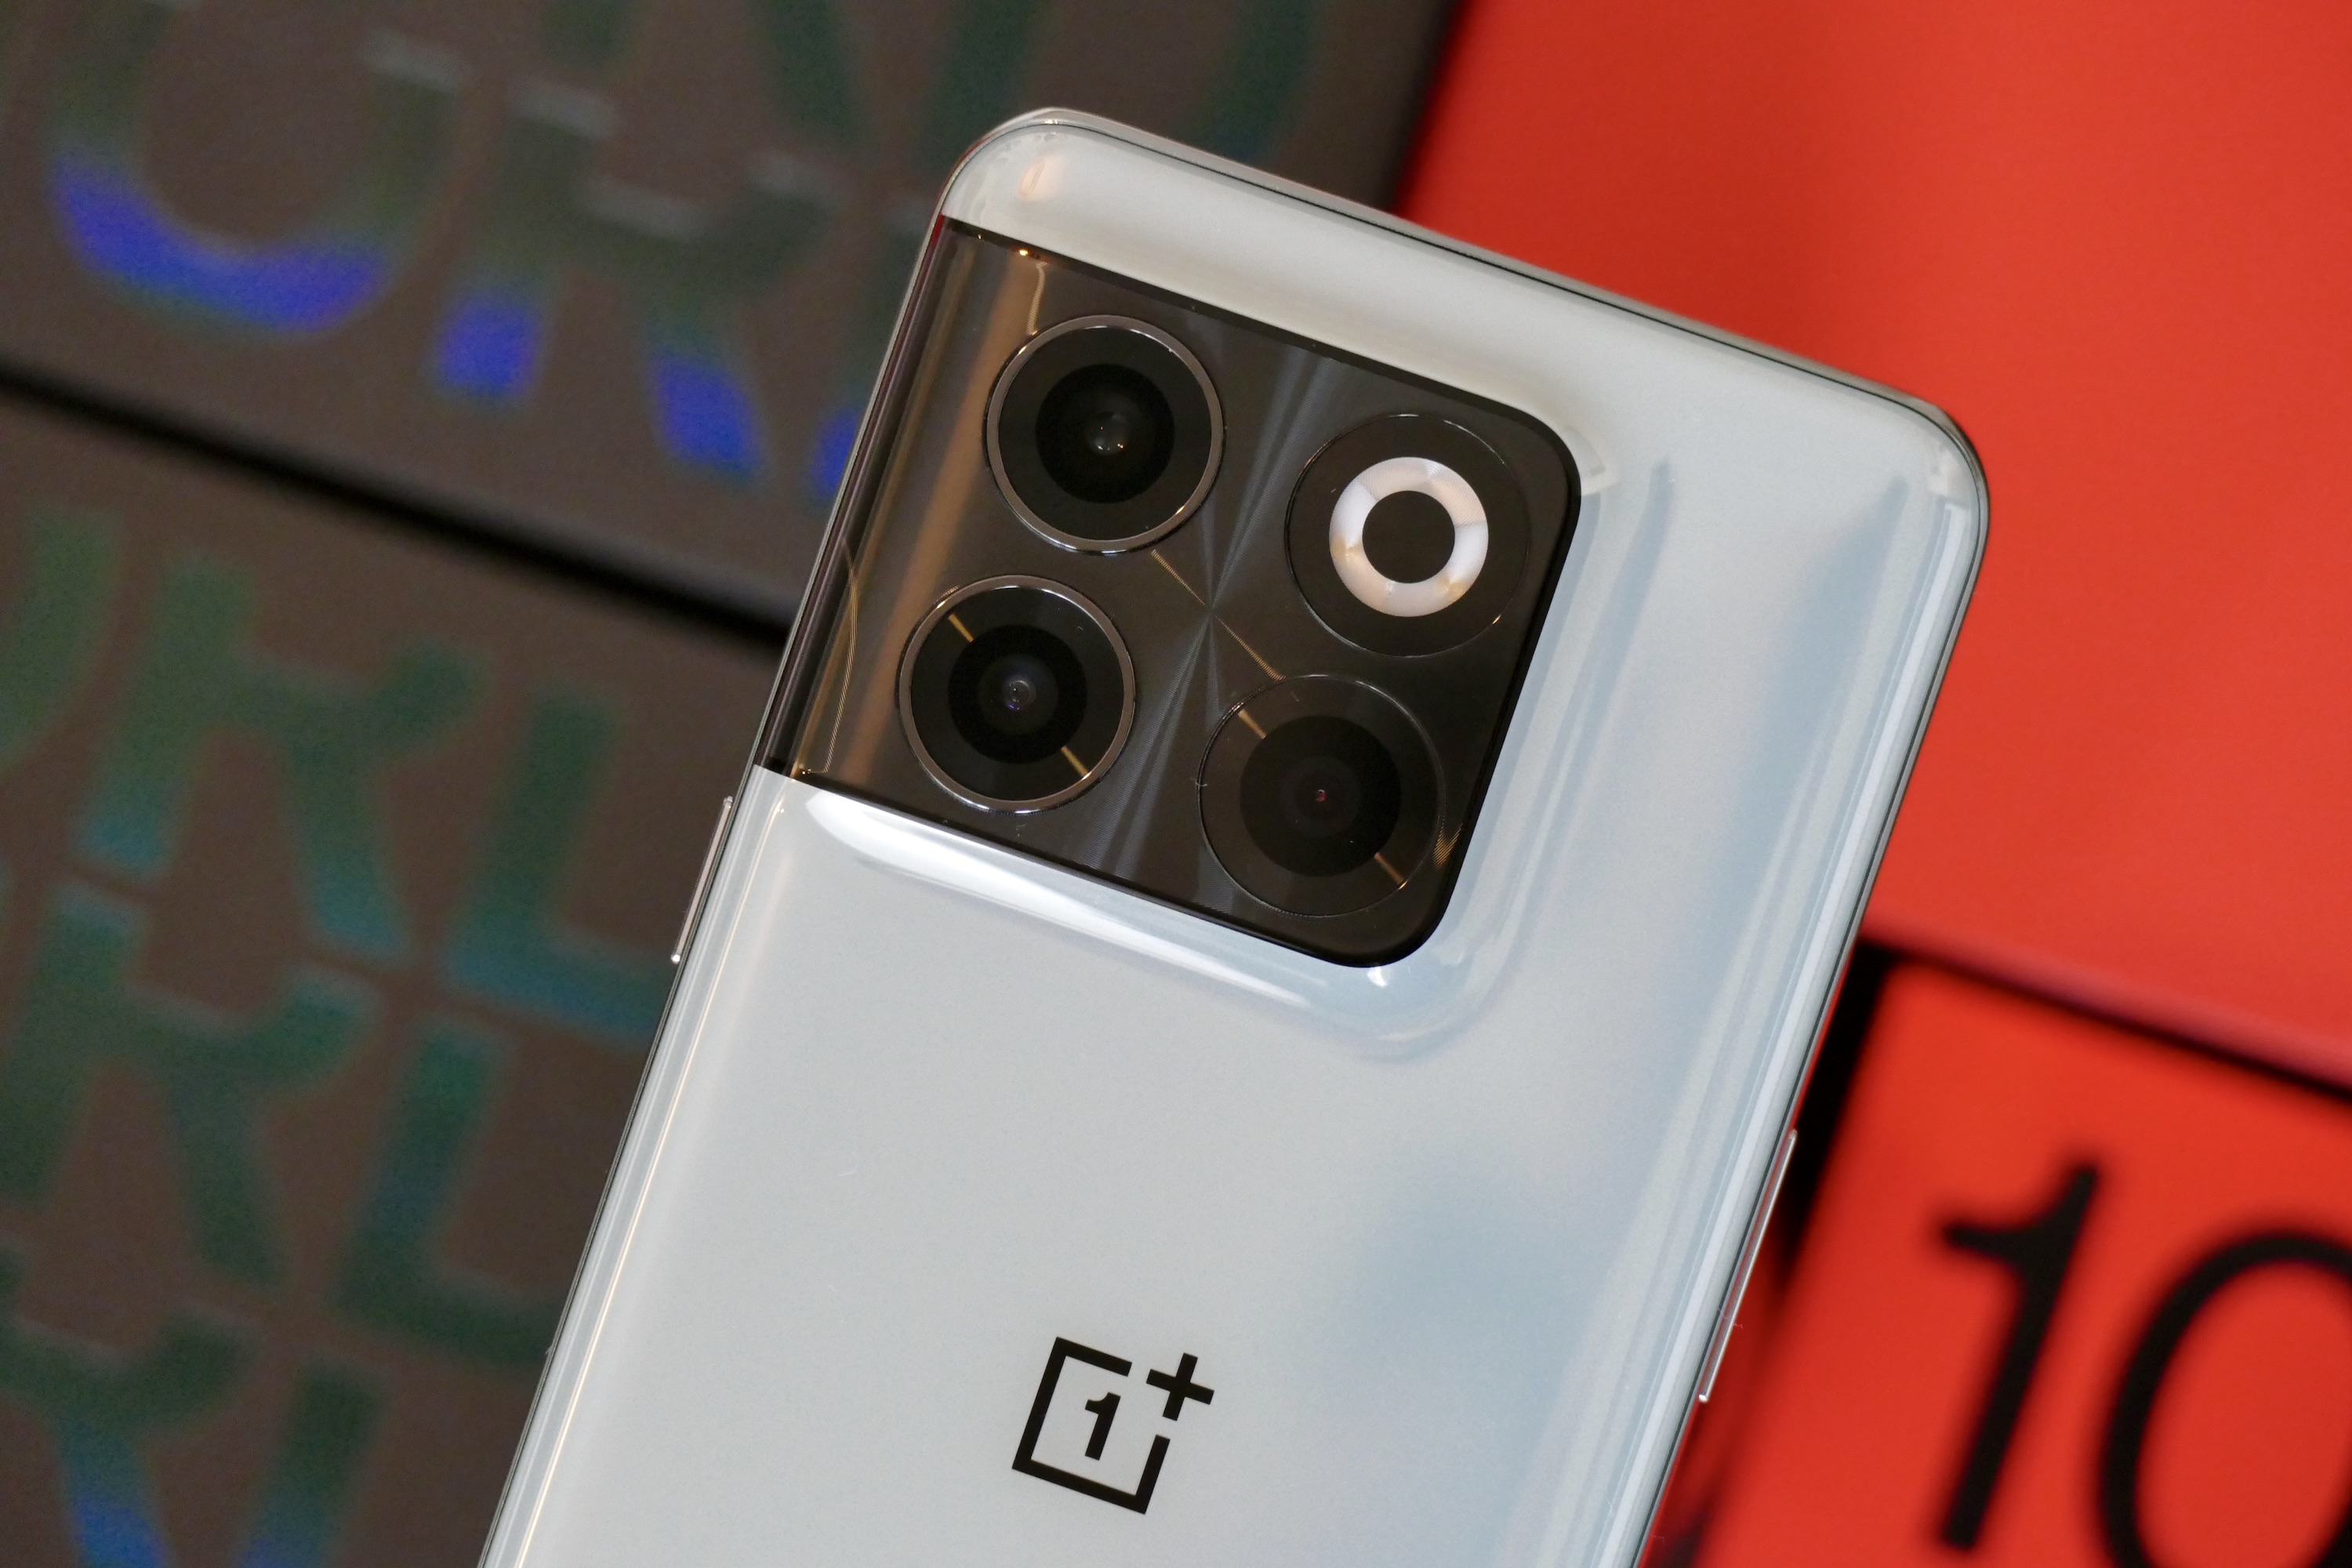 OnePlus 9 Pro review in 2023 - After OxygenOS 13.1 update